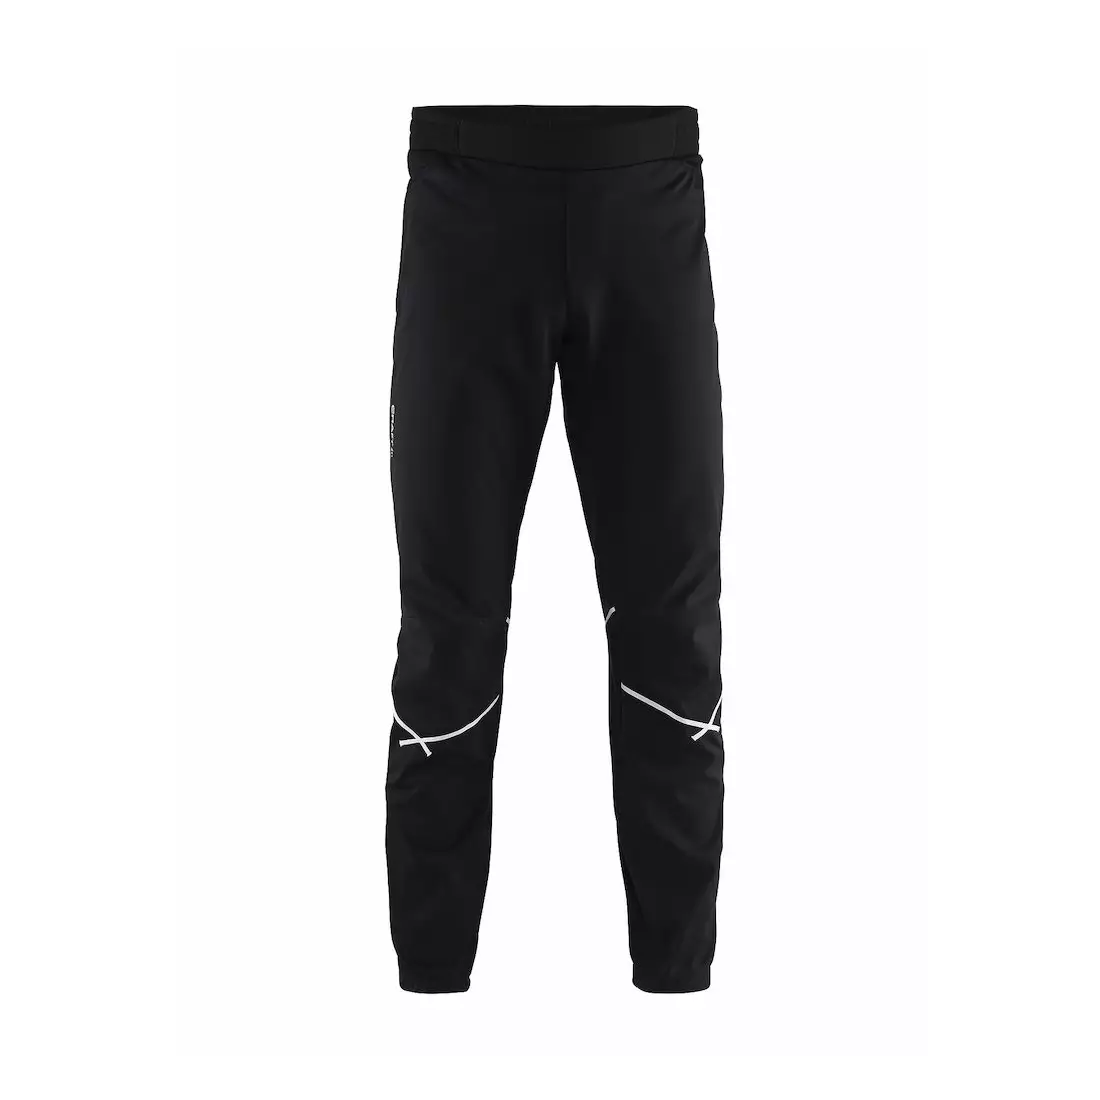 CRAFT XC Force Pant men's insulated sports pants 1905250-999900